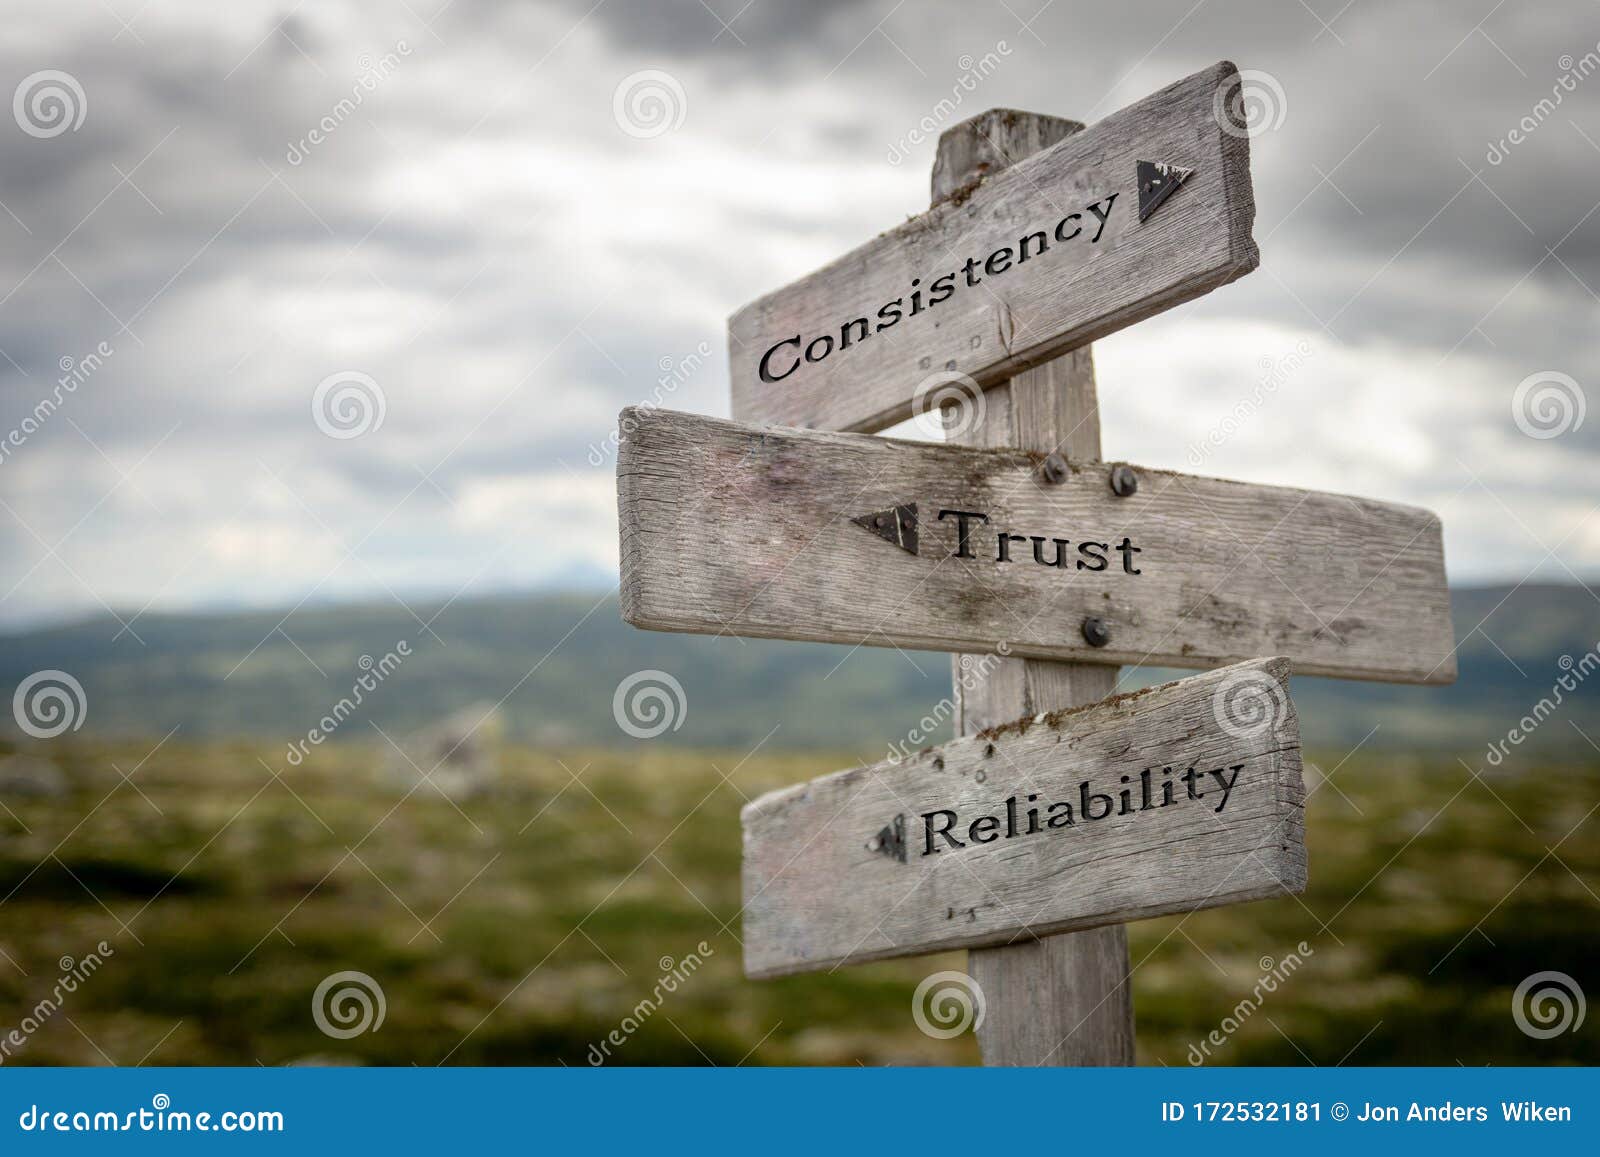 consistency, trust and reliability